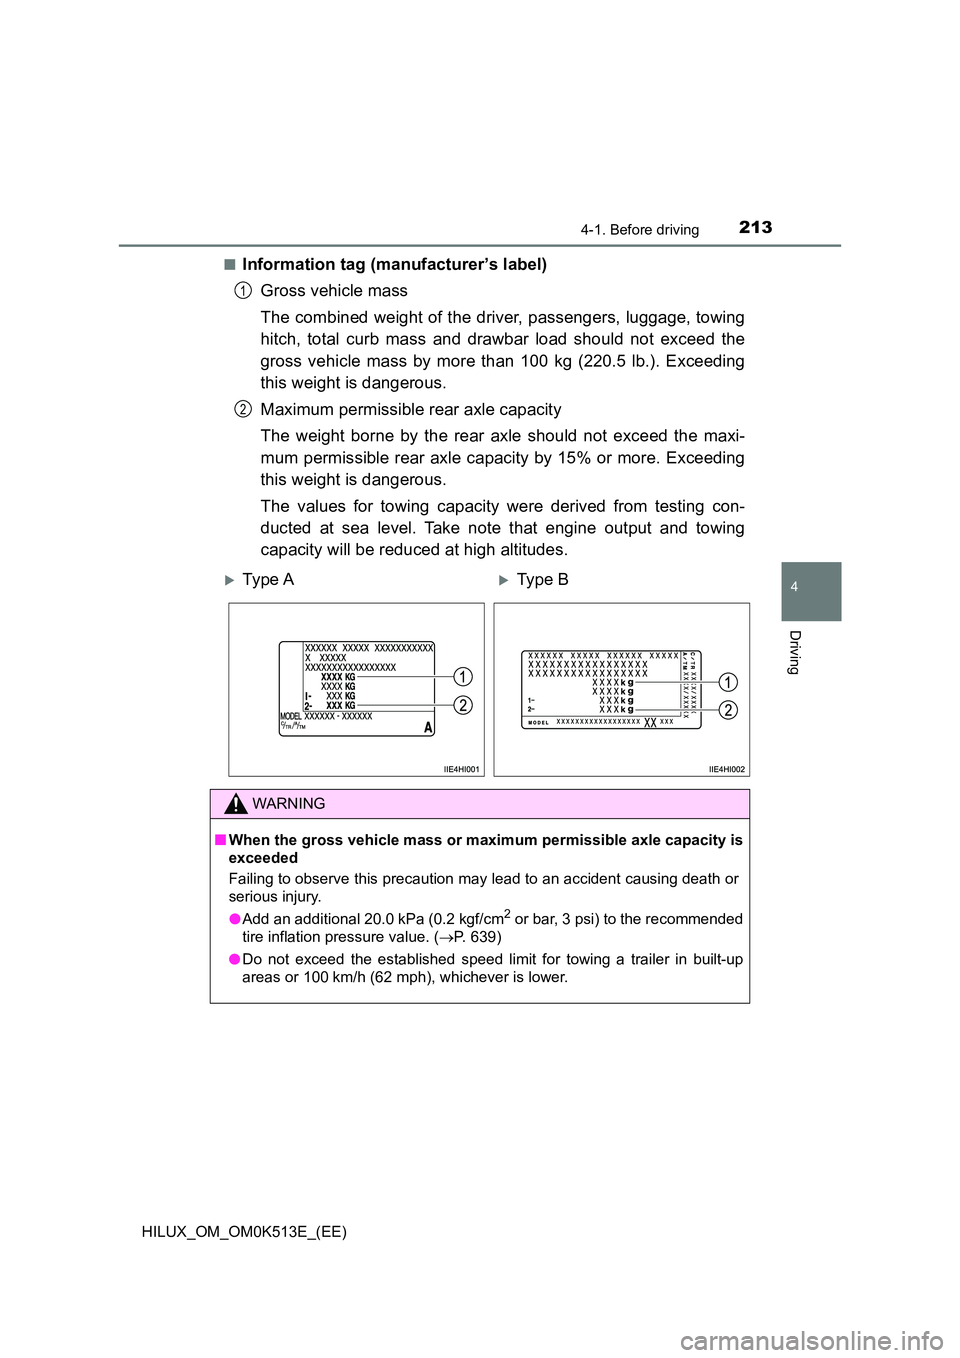 TOYOTA HILUX 2021  Owners Manual (in English) 2134-1. Before driving
4
Driving
HILUX_OM_OM0K513E_(EE) 
�QInformation tag (manufacturer’s label) 
Gross vehicle mass 
The combined weight of the driver, passengers, luggage, towing 
hitch, total cu